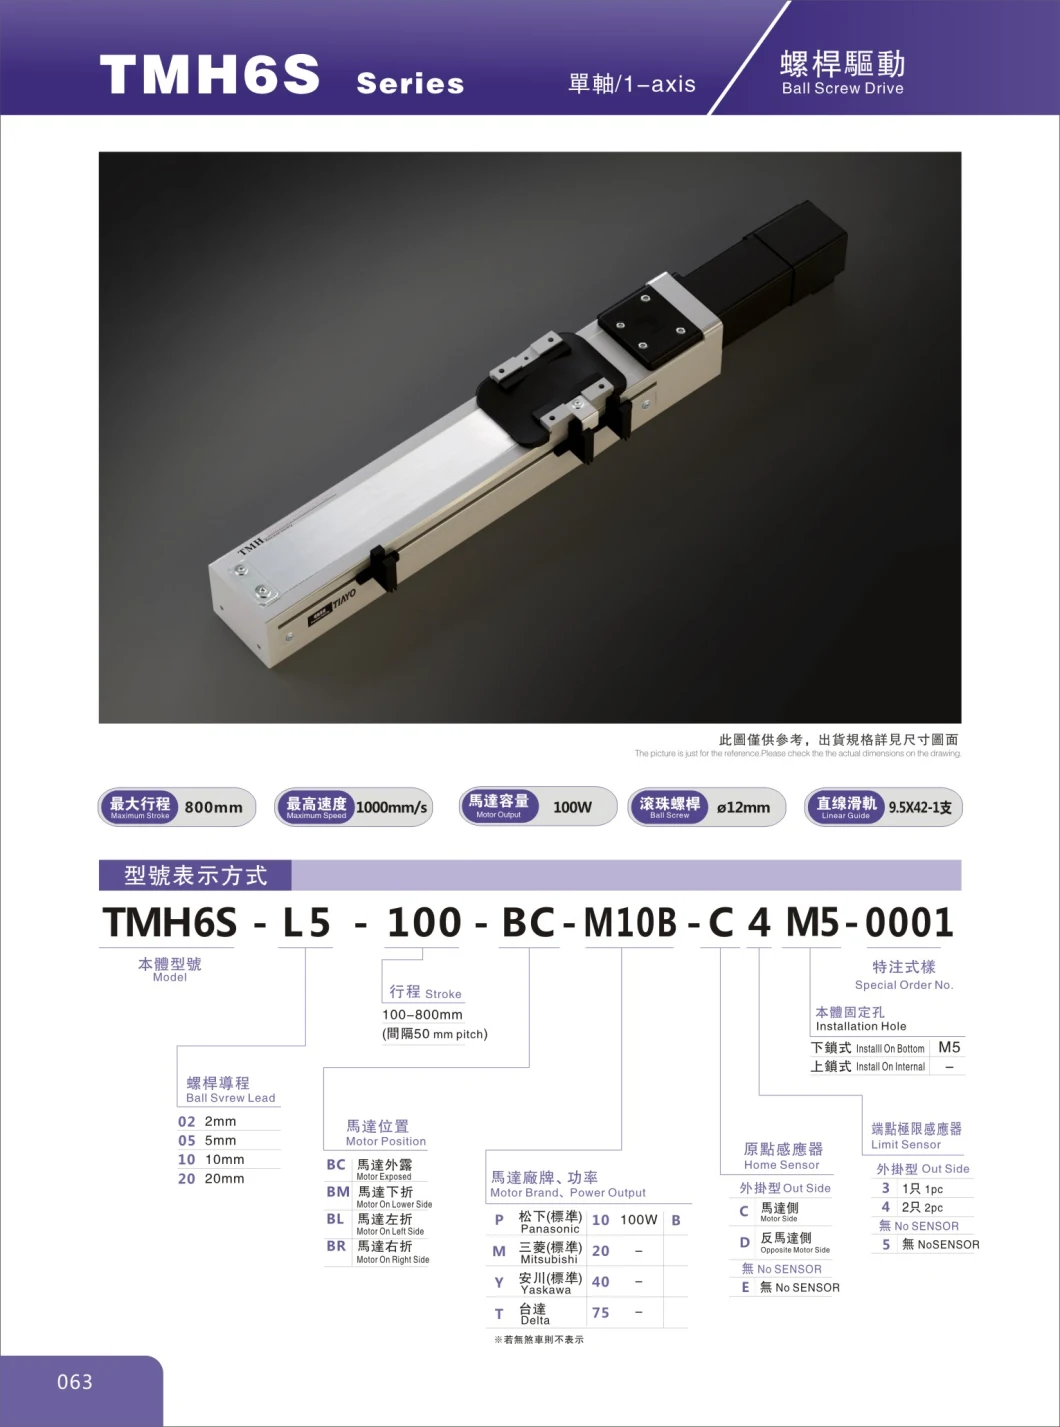 Top Quality Ball Screw Actuators Xyz Linear Motion System for Robotic System